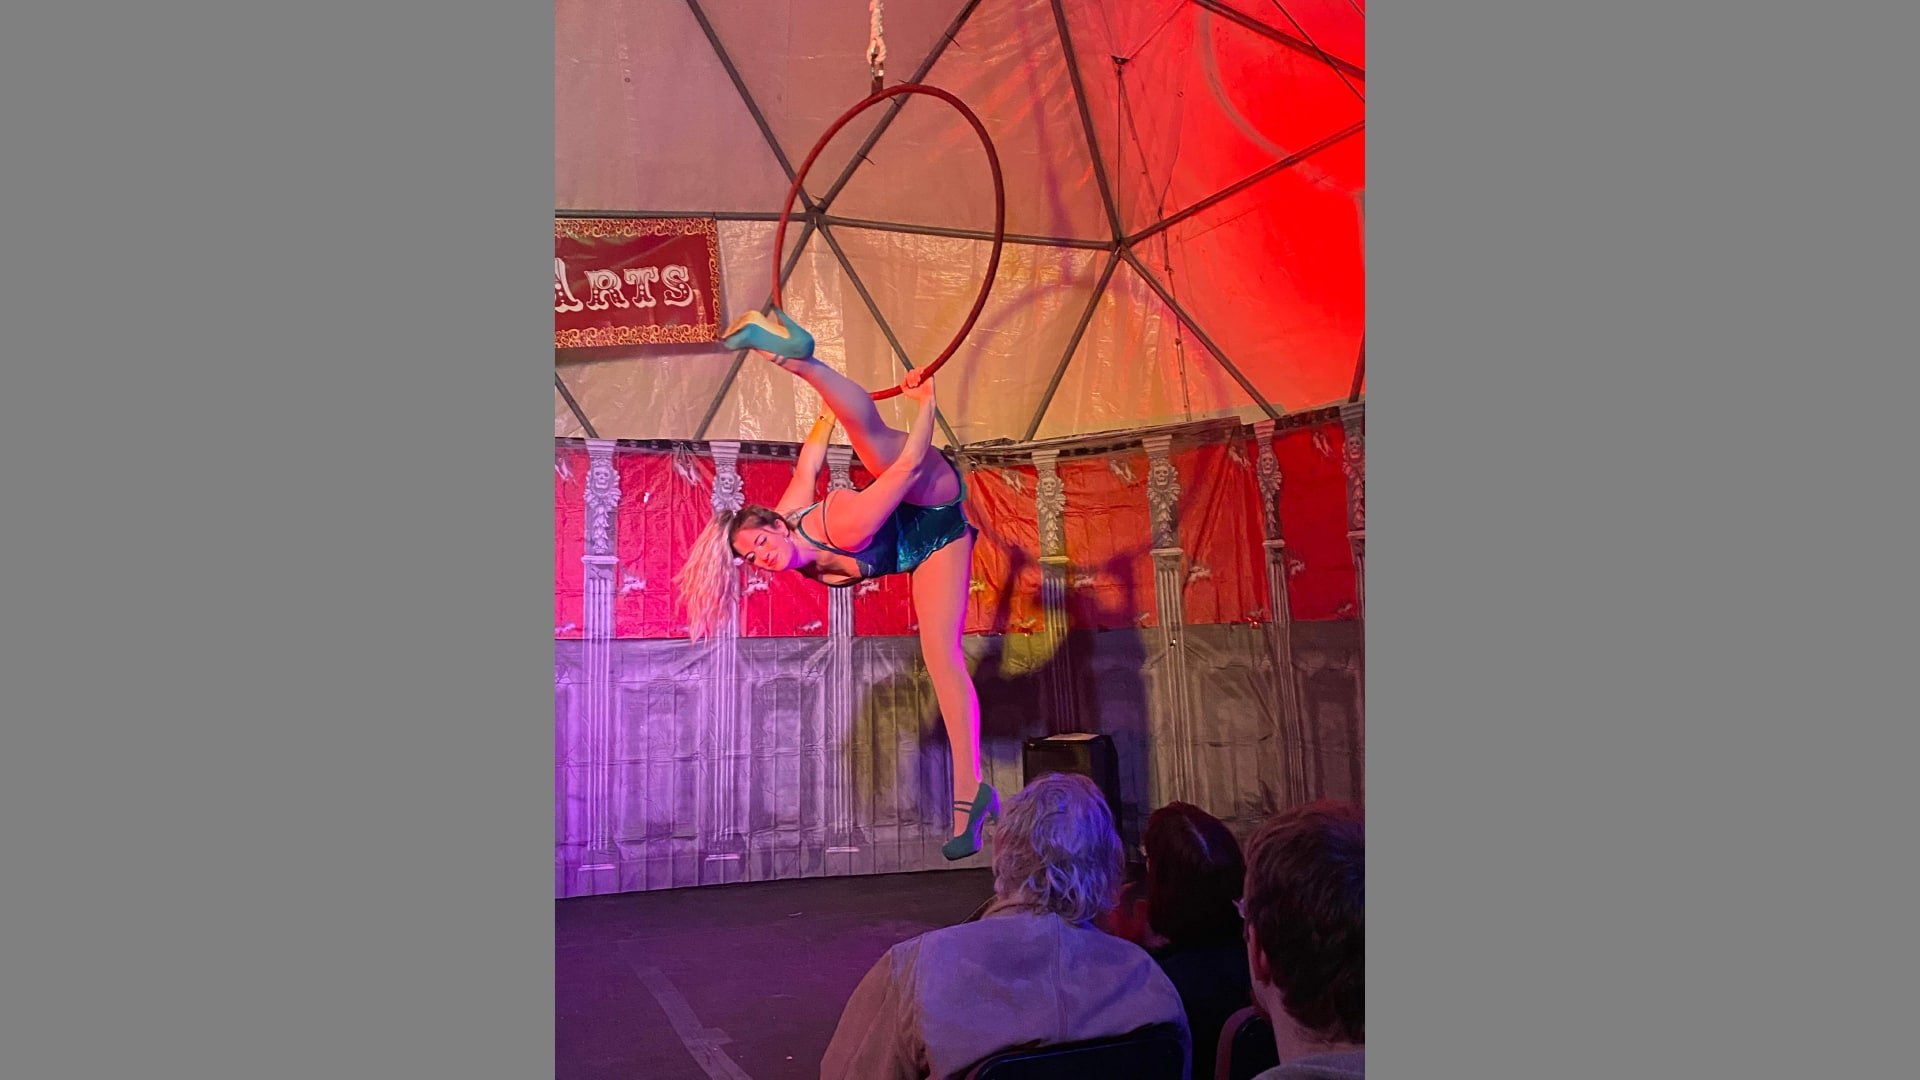 An woman does the splits on an aerial ring